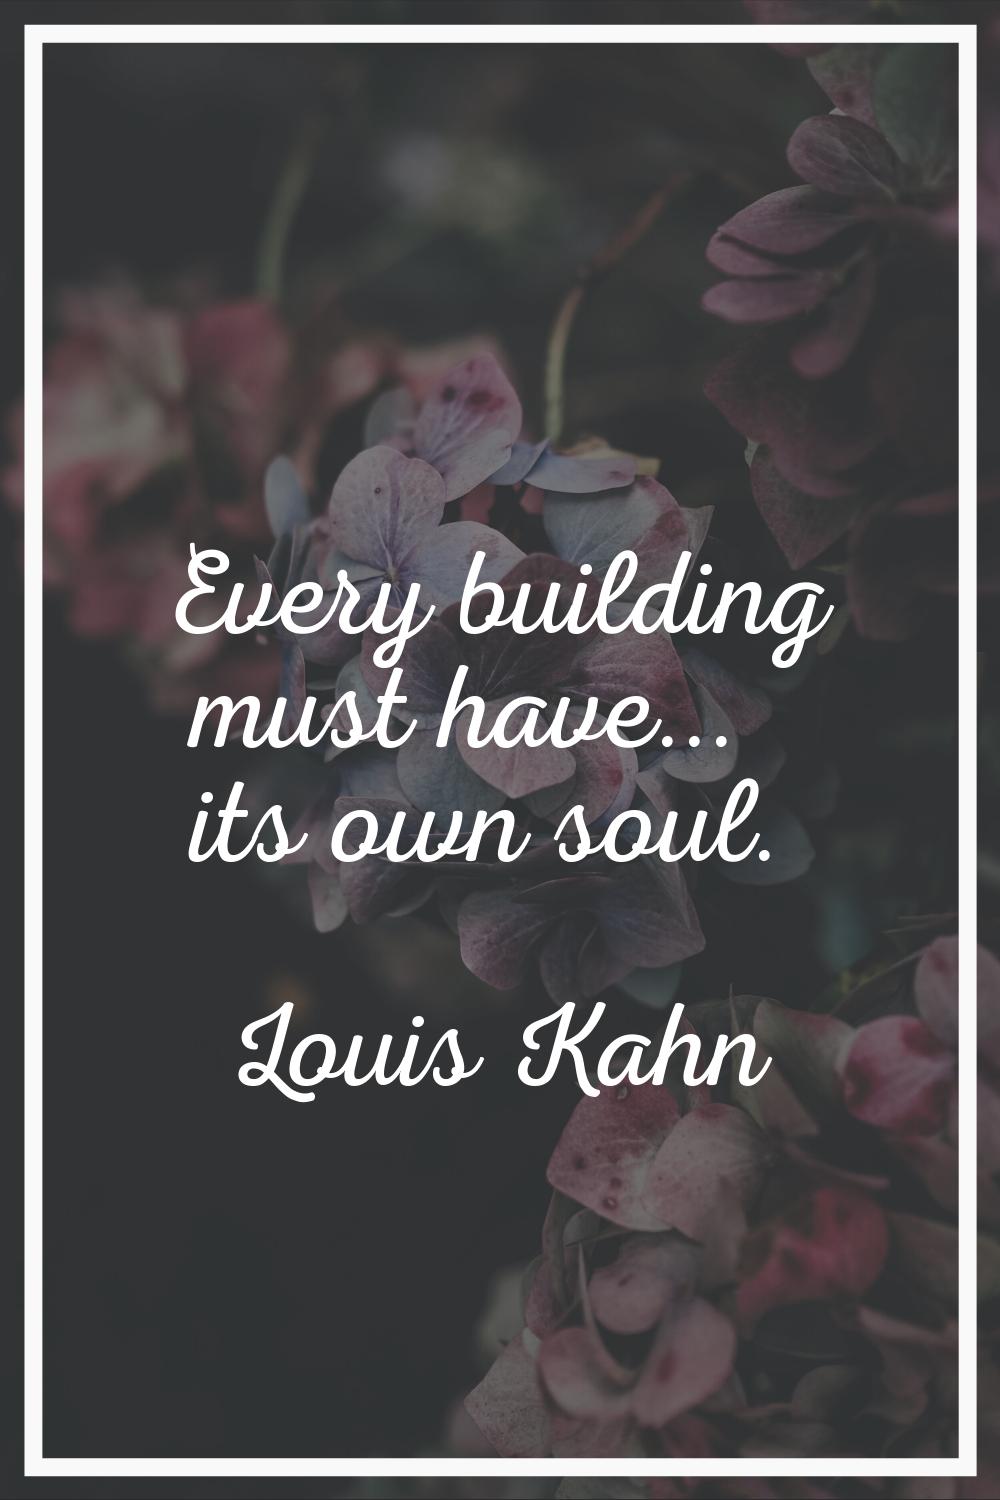 Every building must have... its own soul.